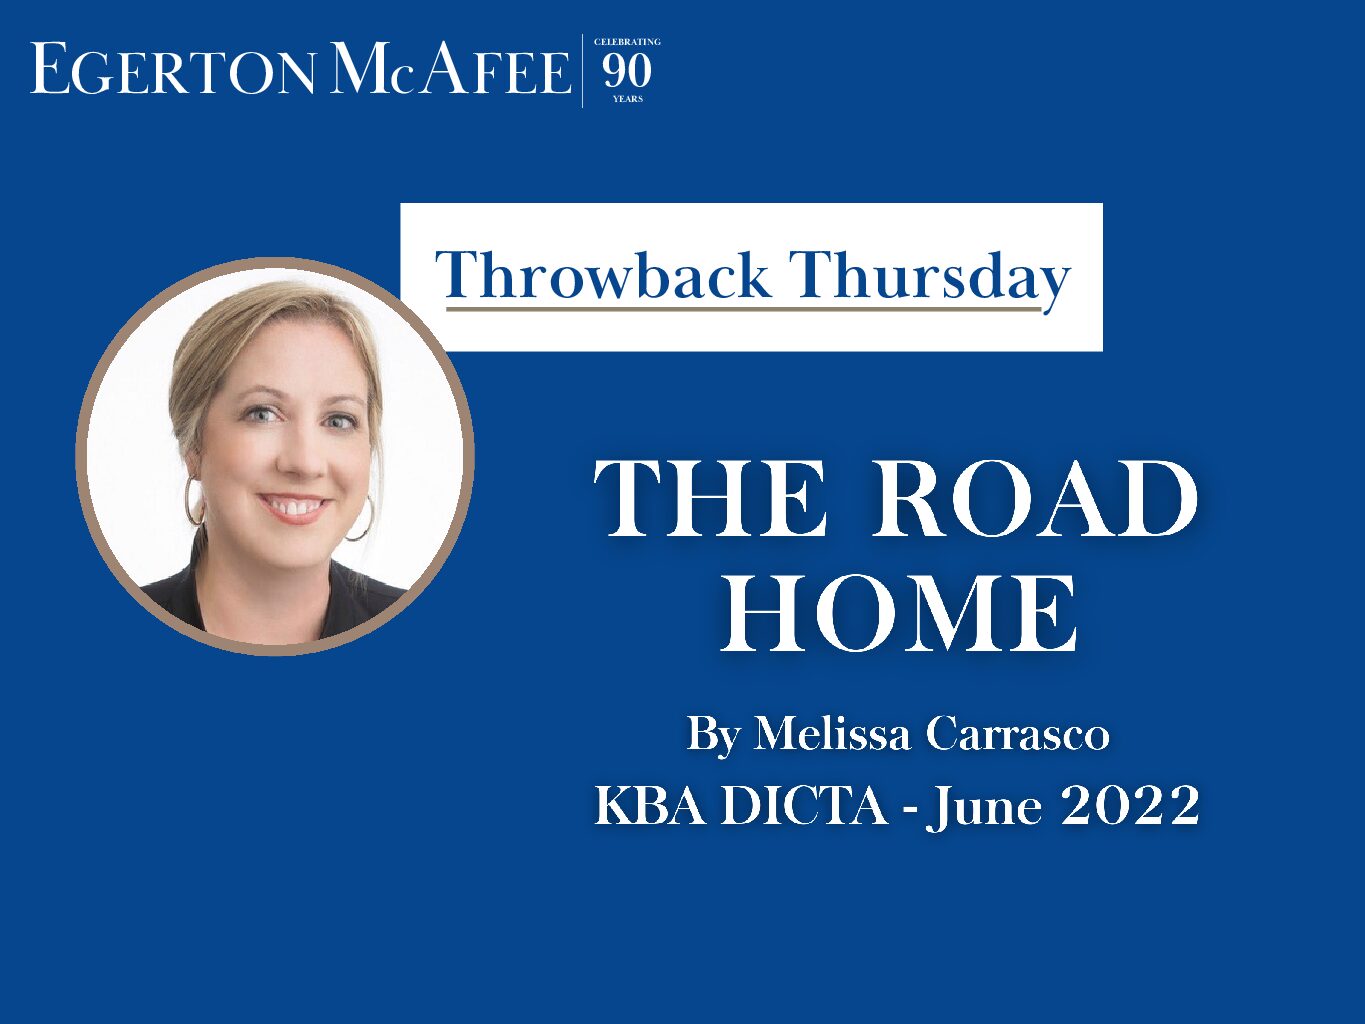 Throwback Thursday – THE ROAD HOME by Melissa Carrasco